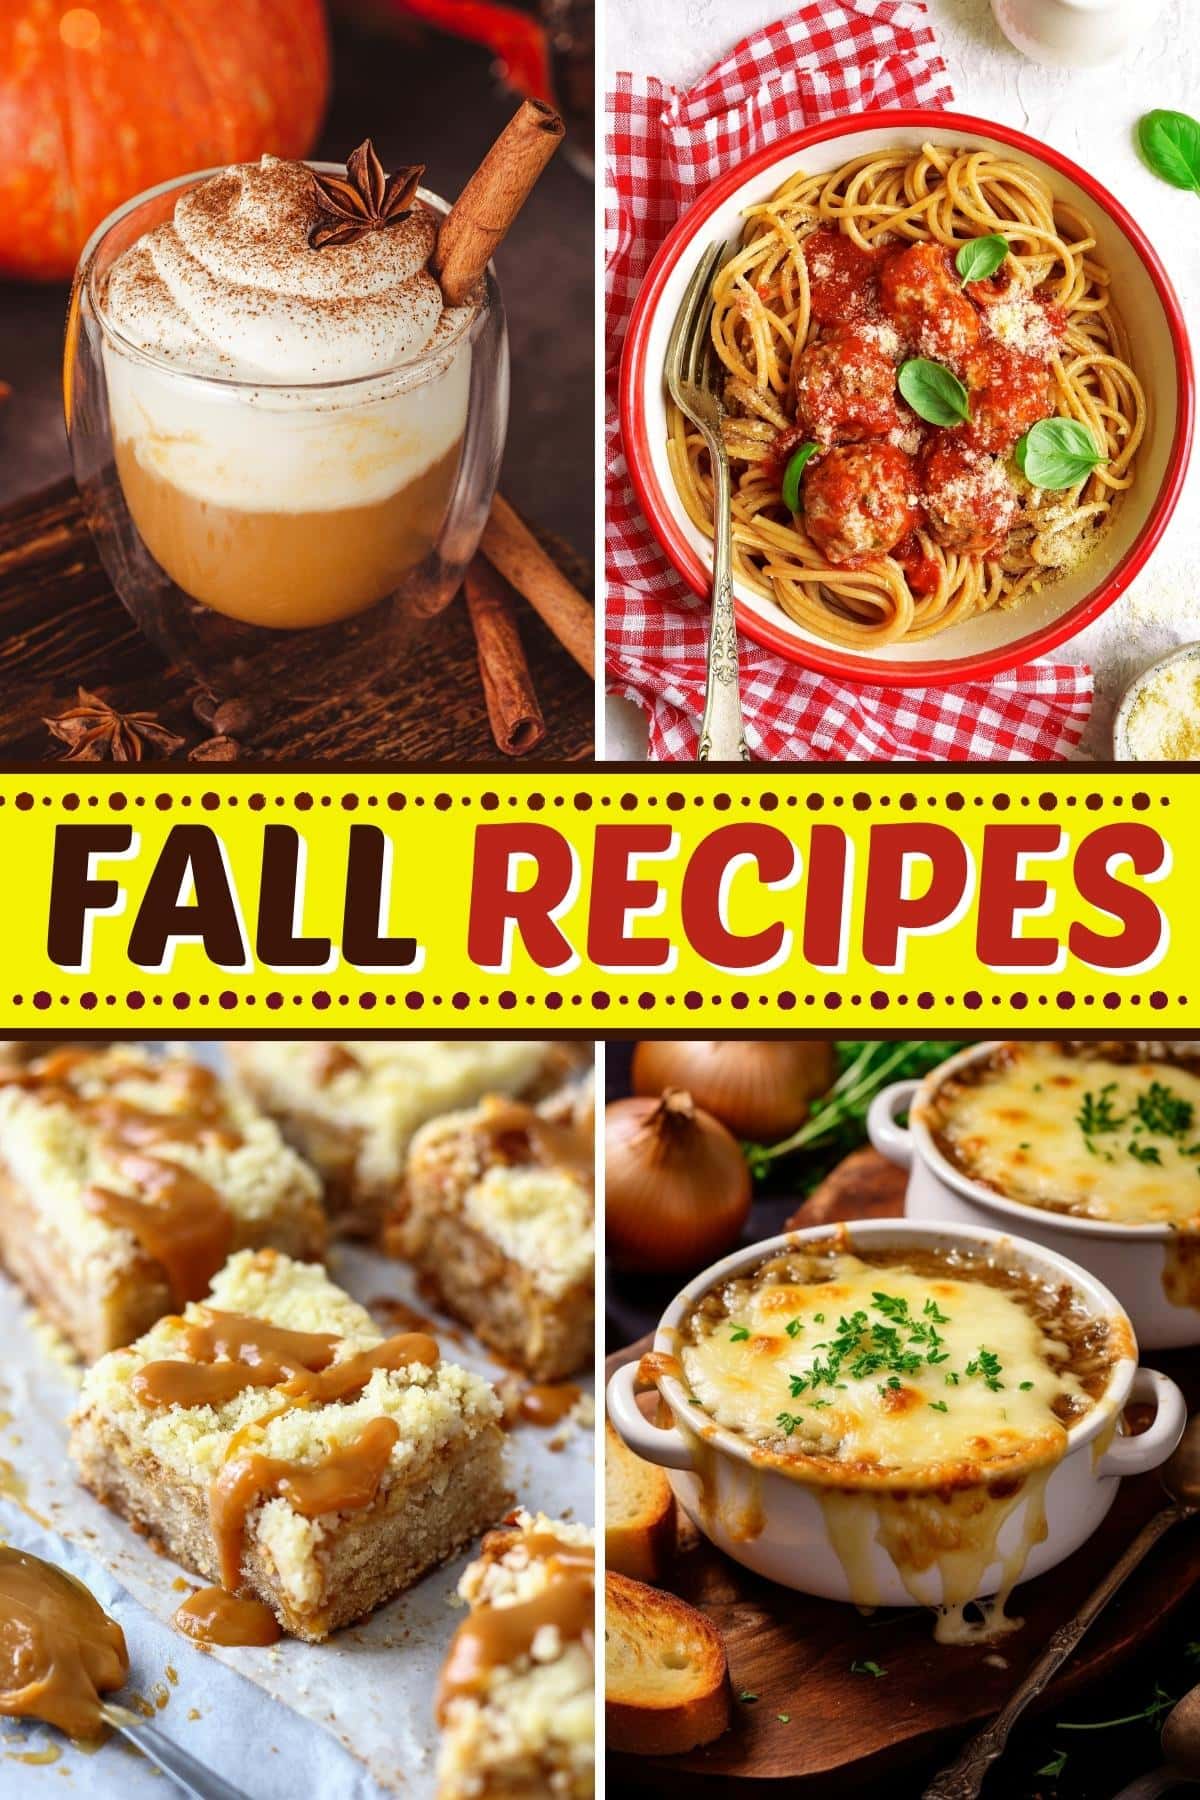 36 Popular Fall Recipes from Dinner to Dessert - Insanely Good